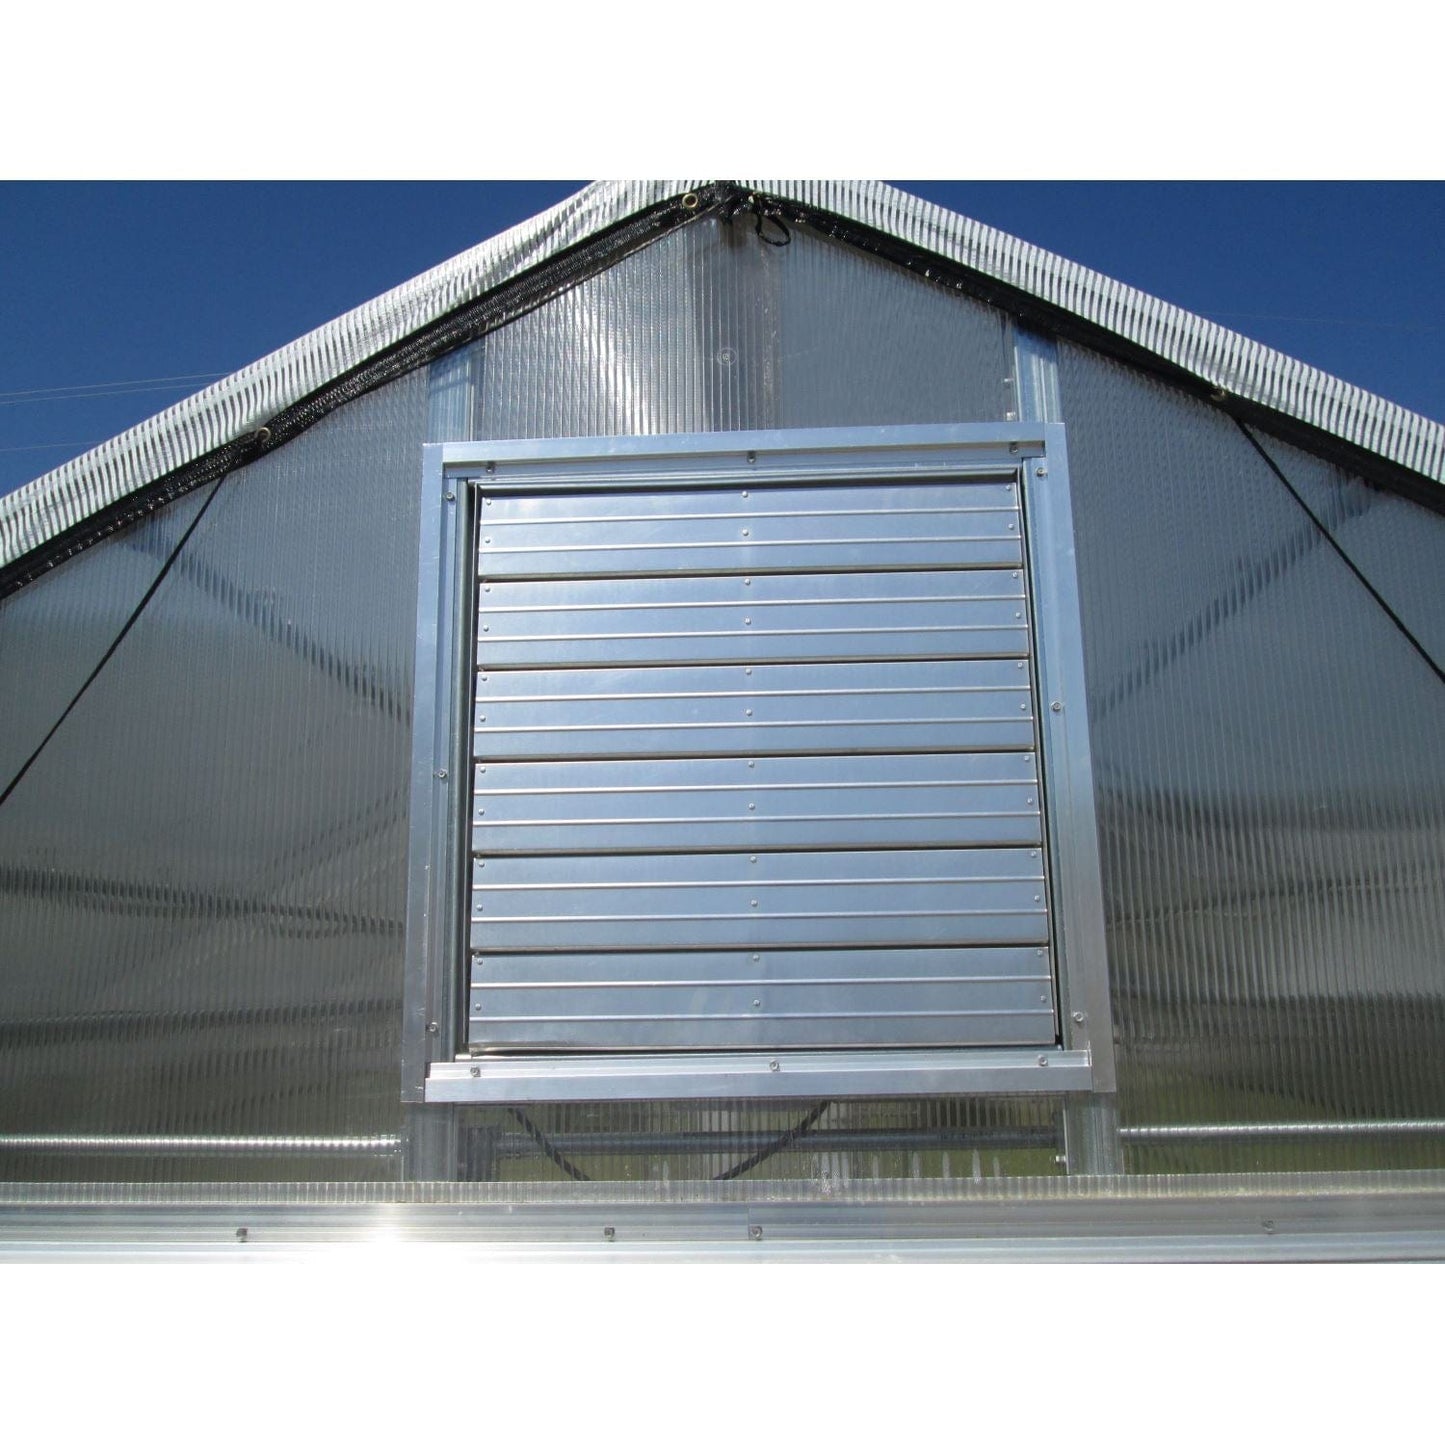 Riverstone Industries Deluxe Greenhouse Kit Riverstone | Whitney - Premium Grower's Edition - 12FT x 18FT Educational Greenhouse Kit With 8FT High Walls R12188-PG